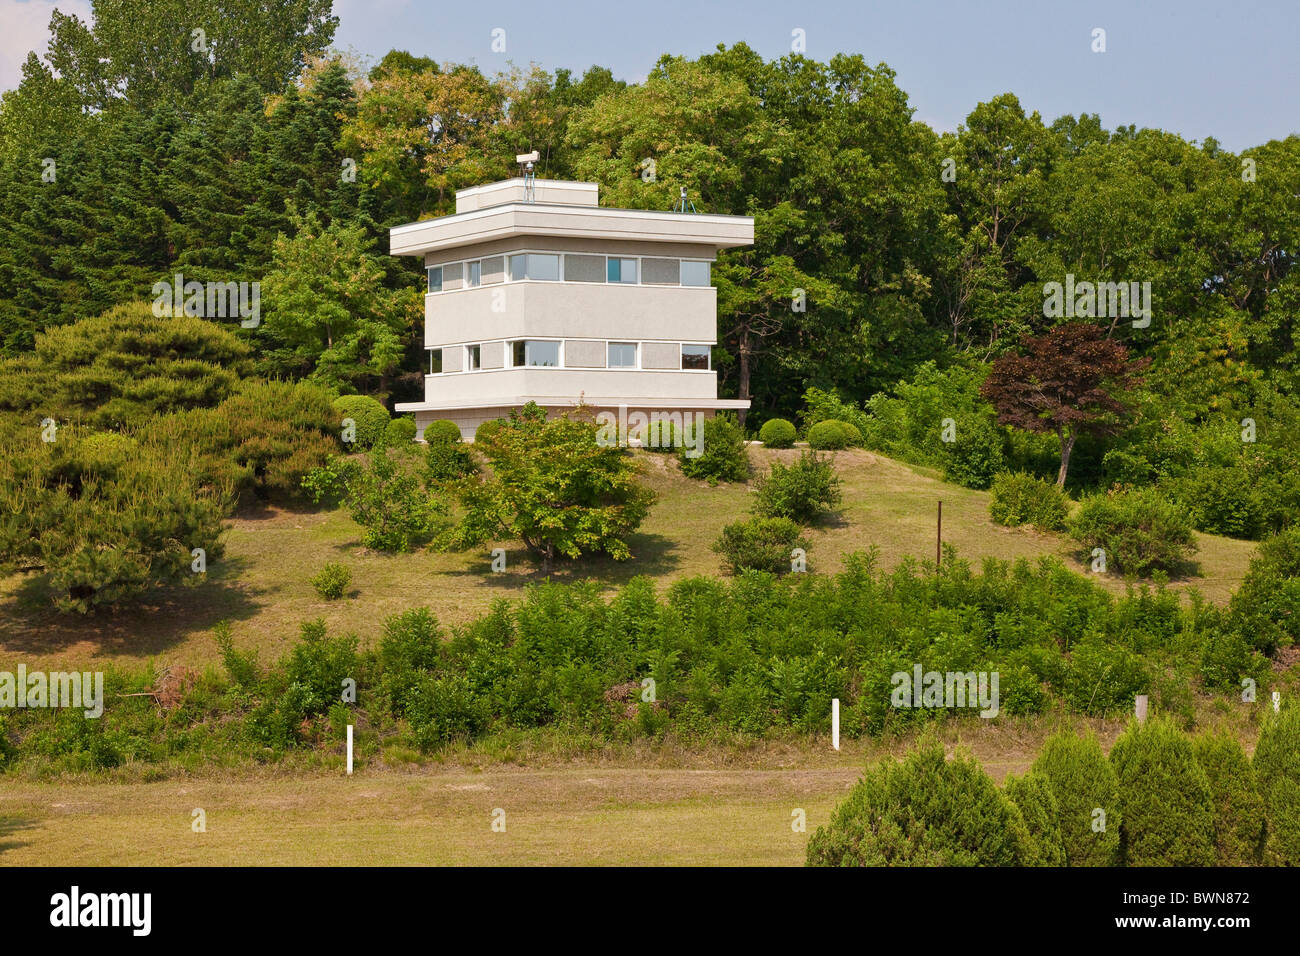 North Korean building in JSA Joint Security Area, DMZ Demilitarized Zone, with white posts indicating actual border. JMH3835 Stock Photo